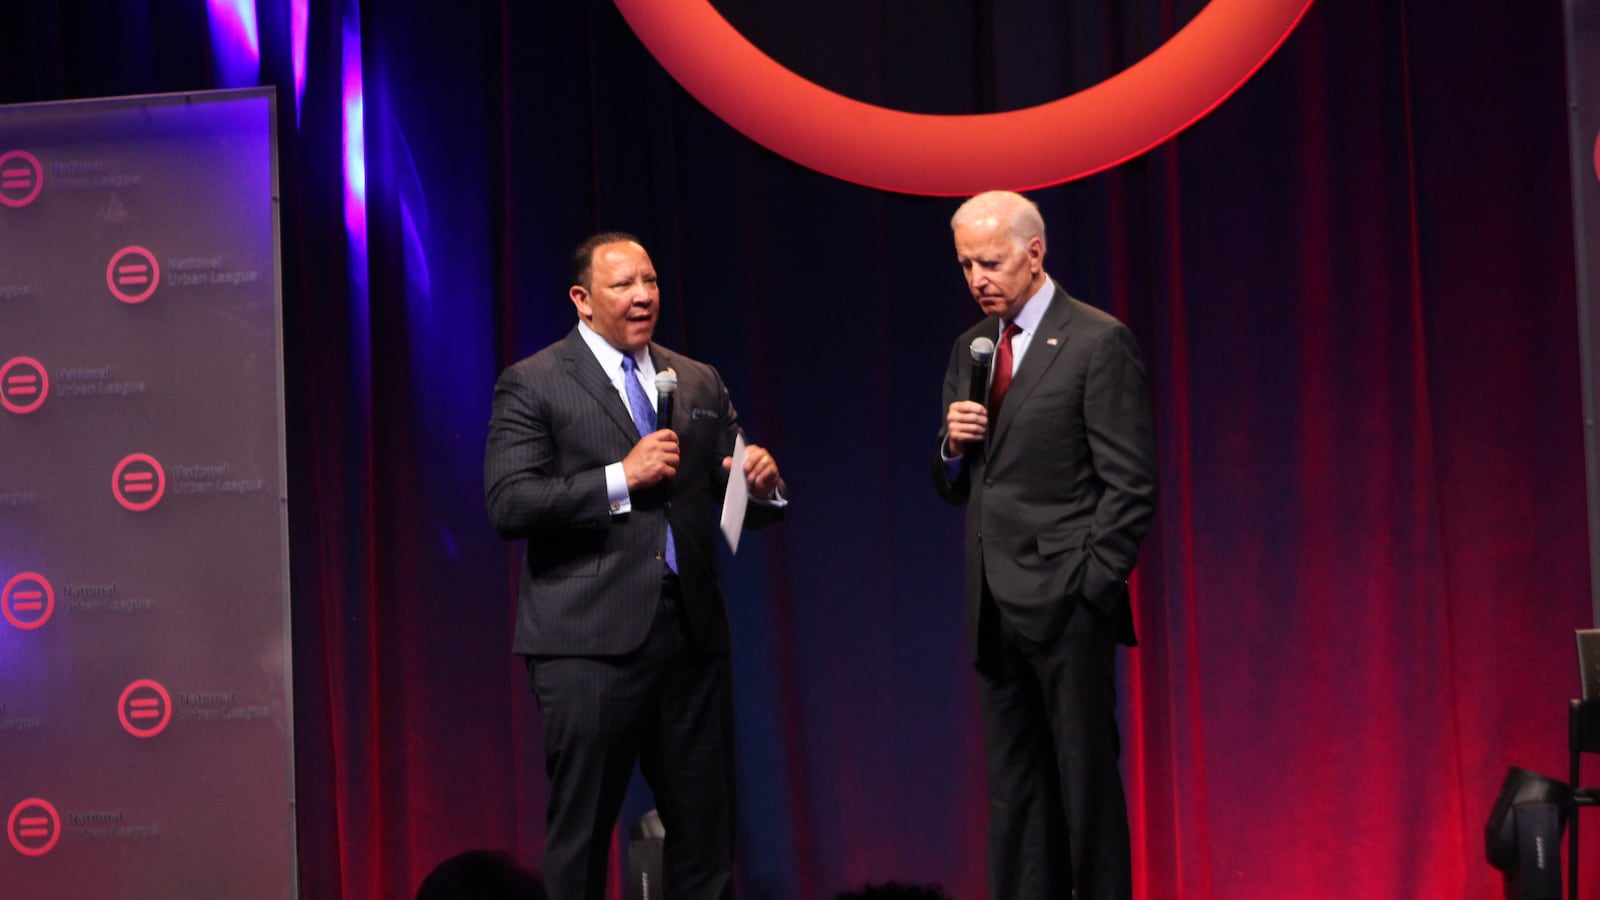 Former vice president Joe Biden speaks with National Urban League President Marc Morial at the organization's conference Thursday in Indianapolis.